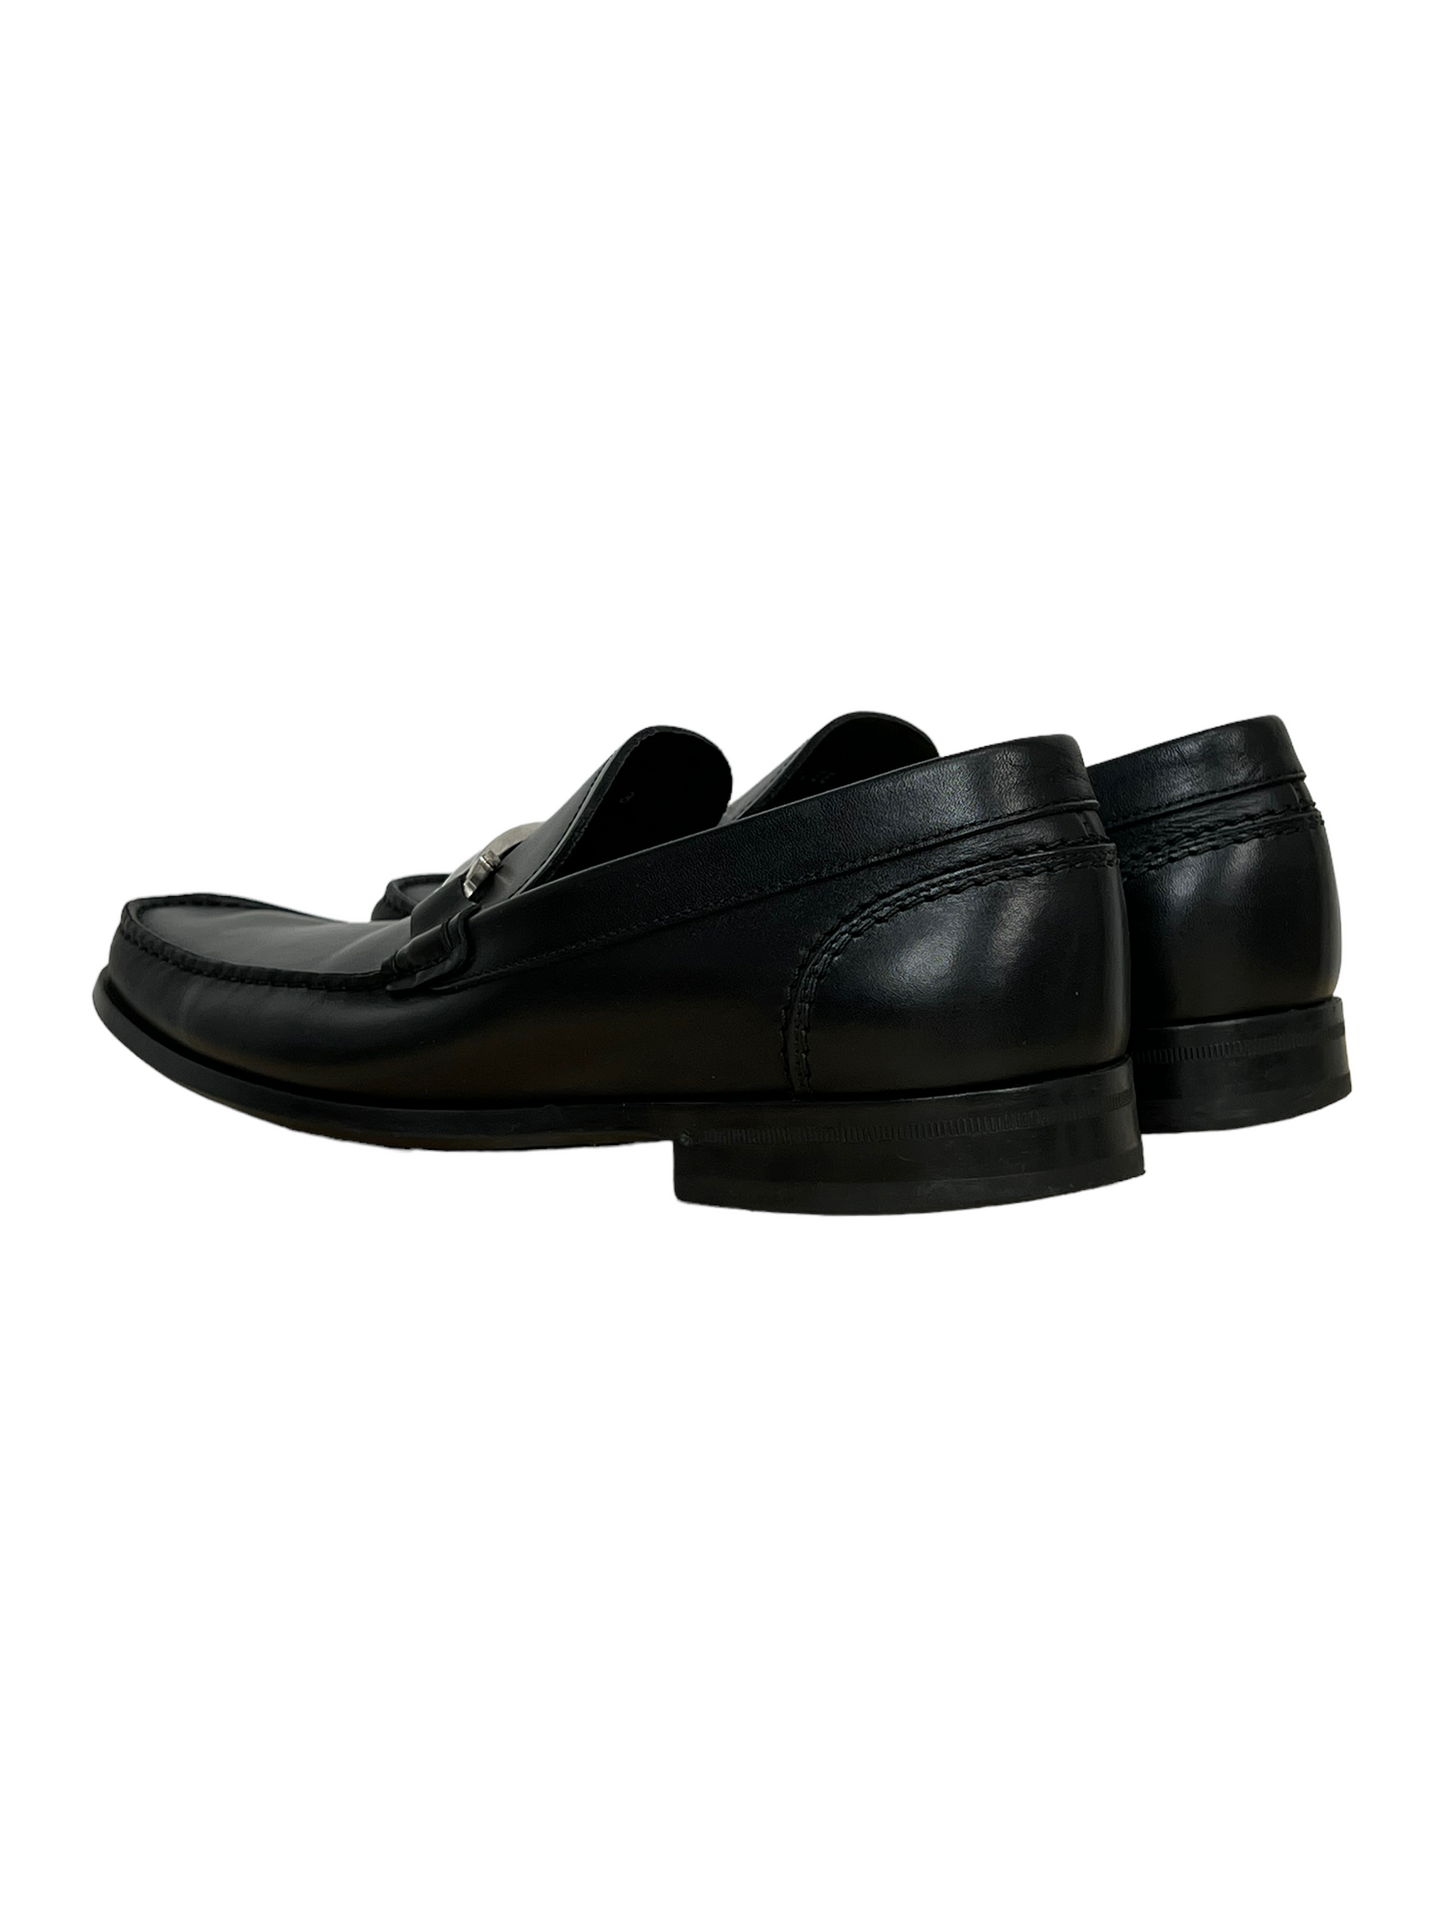 Salvatore Ferragamo Black Leather Loafers - Genuine Design Luxury Consignment for Men. New & Pre-Owned Clothing, Shoes, & Accessories. Calgary, Canada